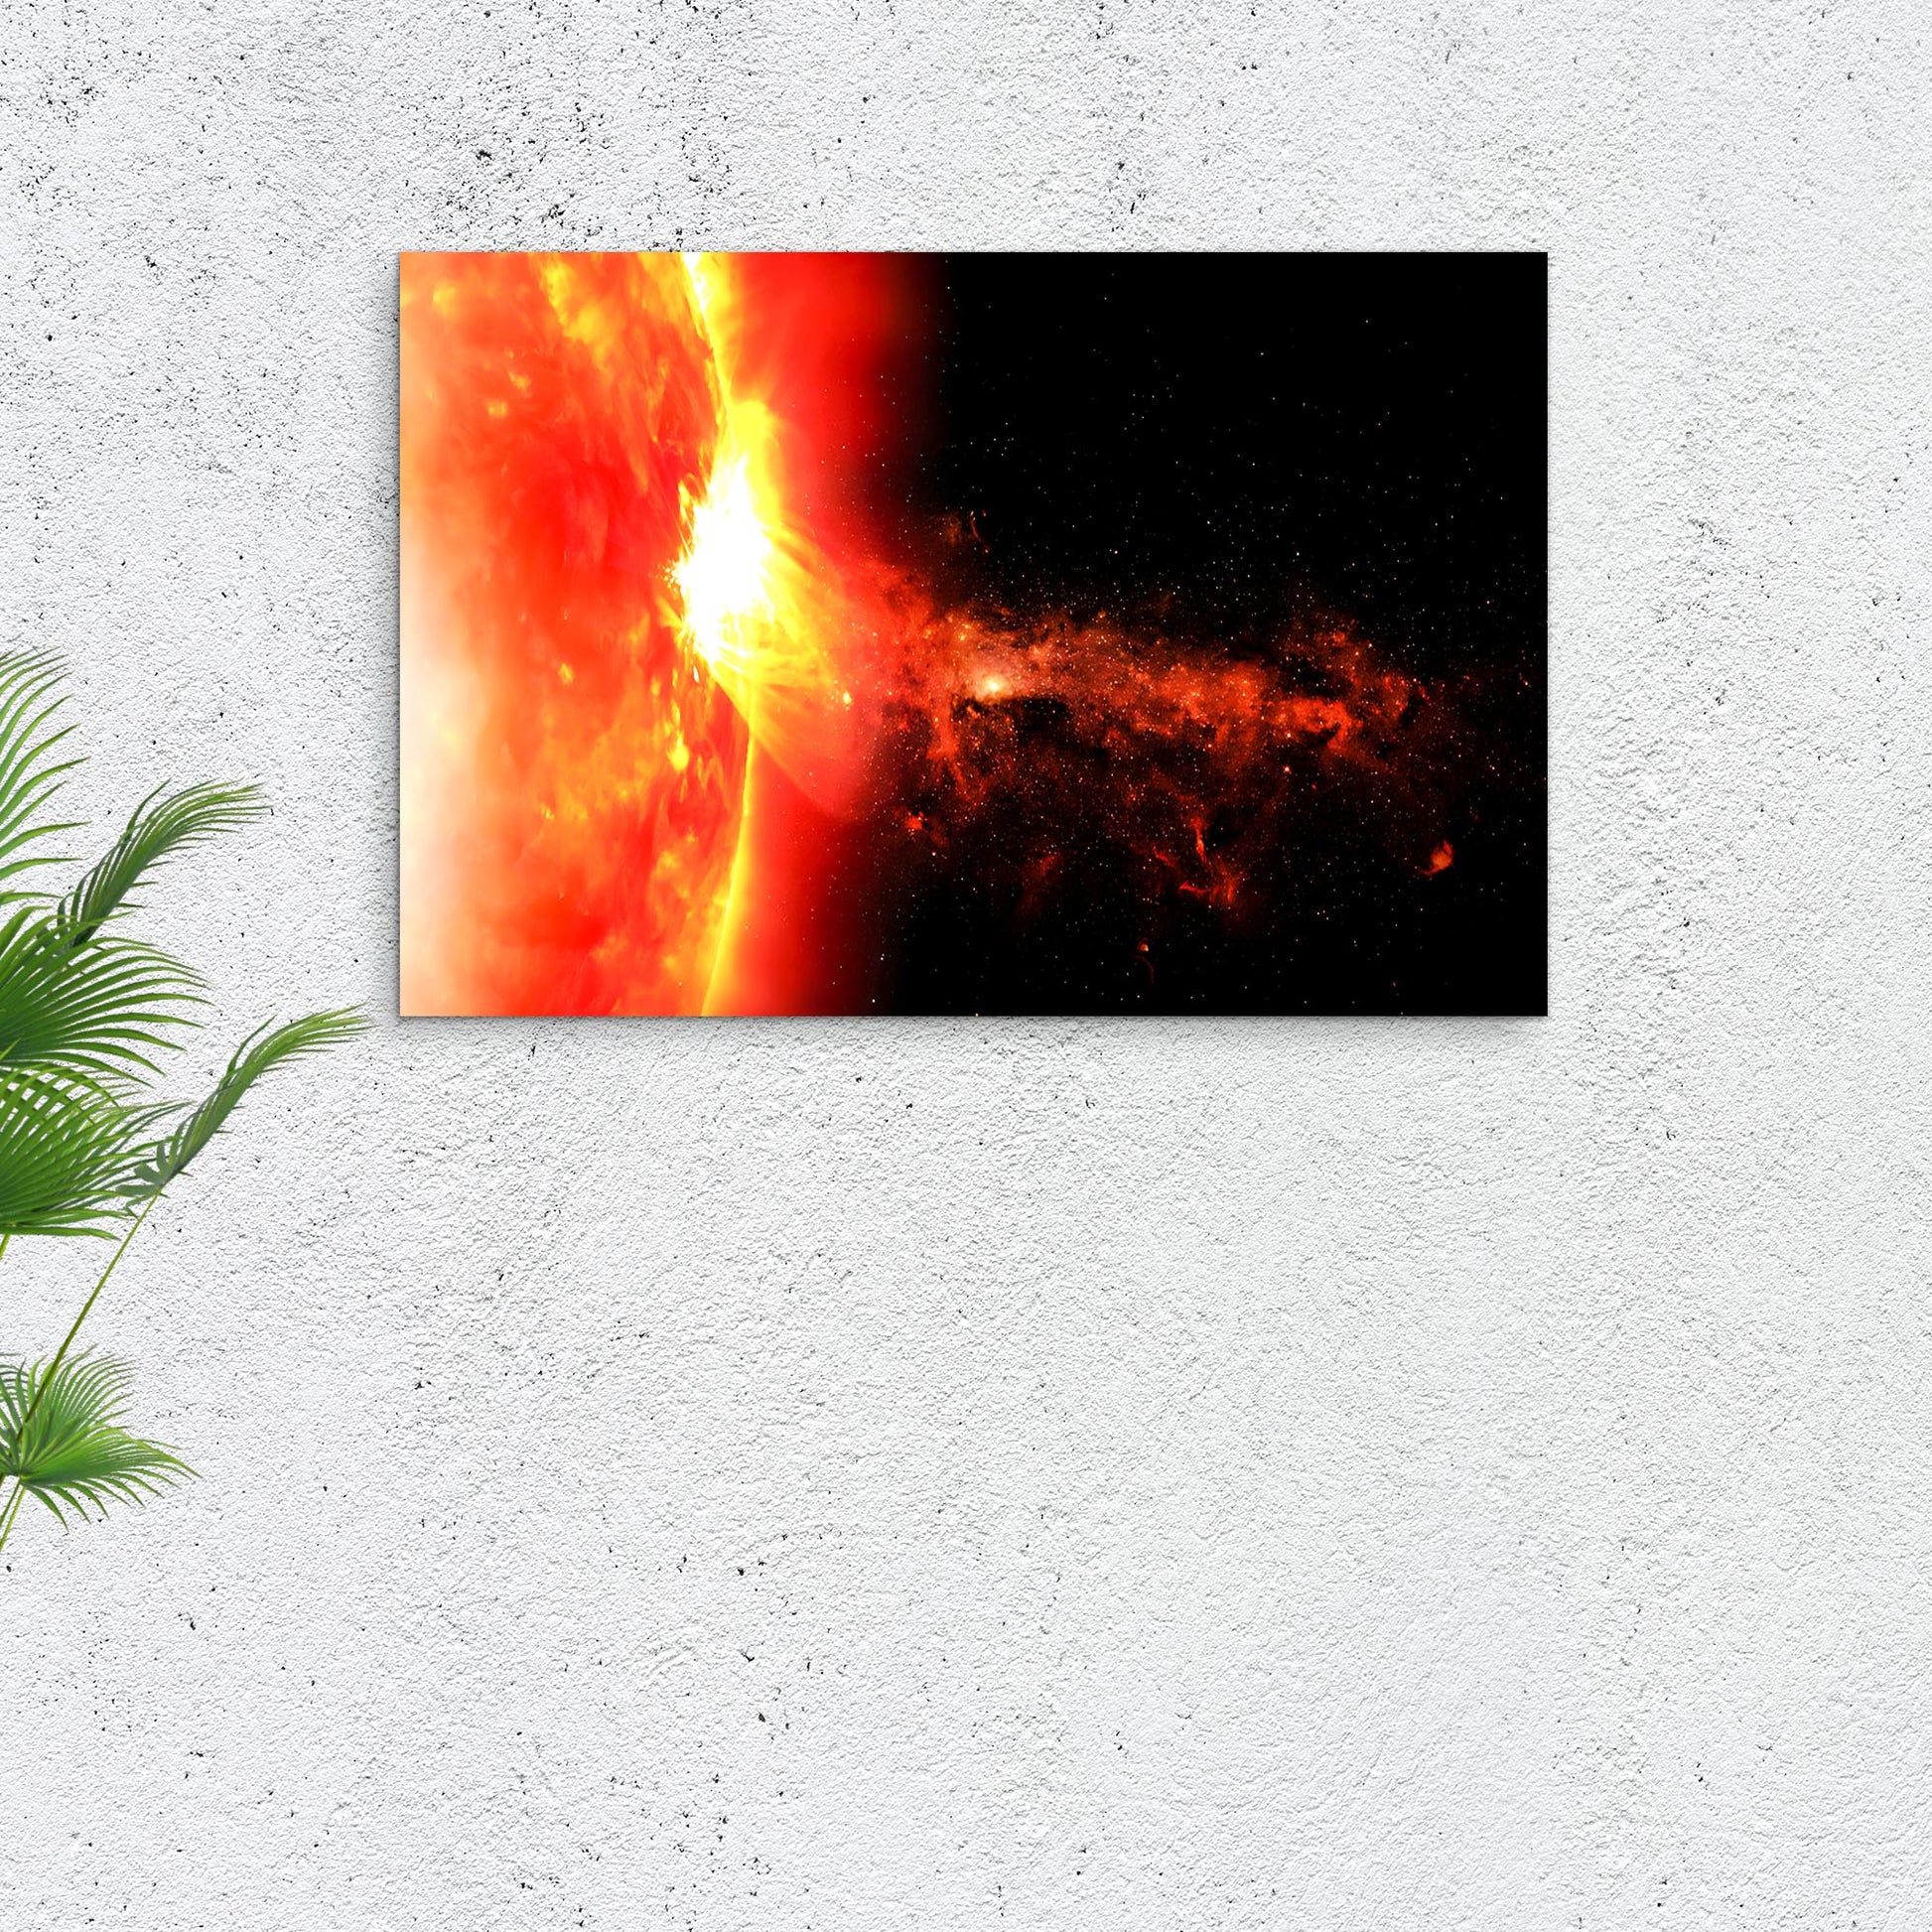 Sun Solar Flare Canvas Wall Art Style 1 - Image by Tailored Canvases